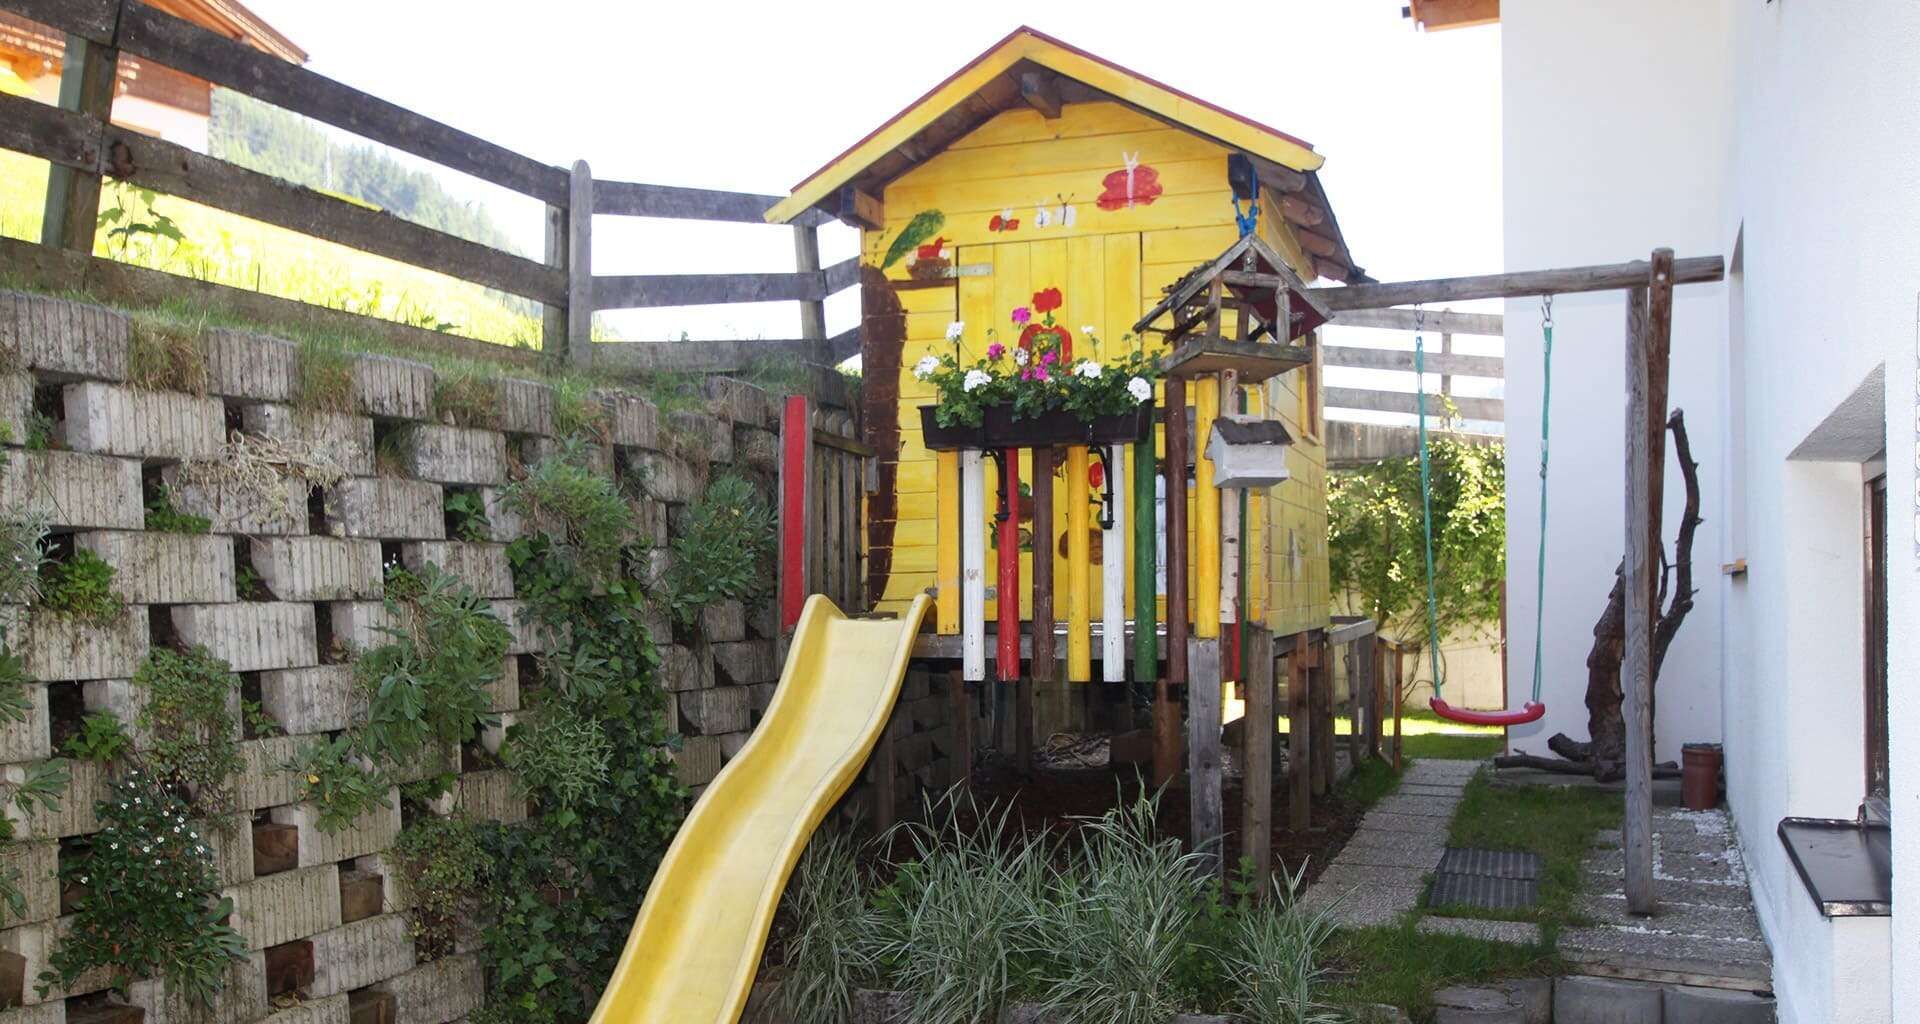 Children's playground at the Elfriede Gerlos guest house